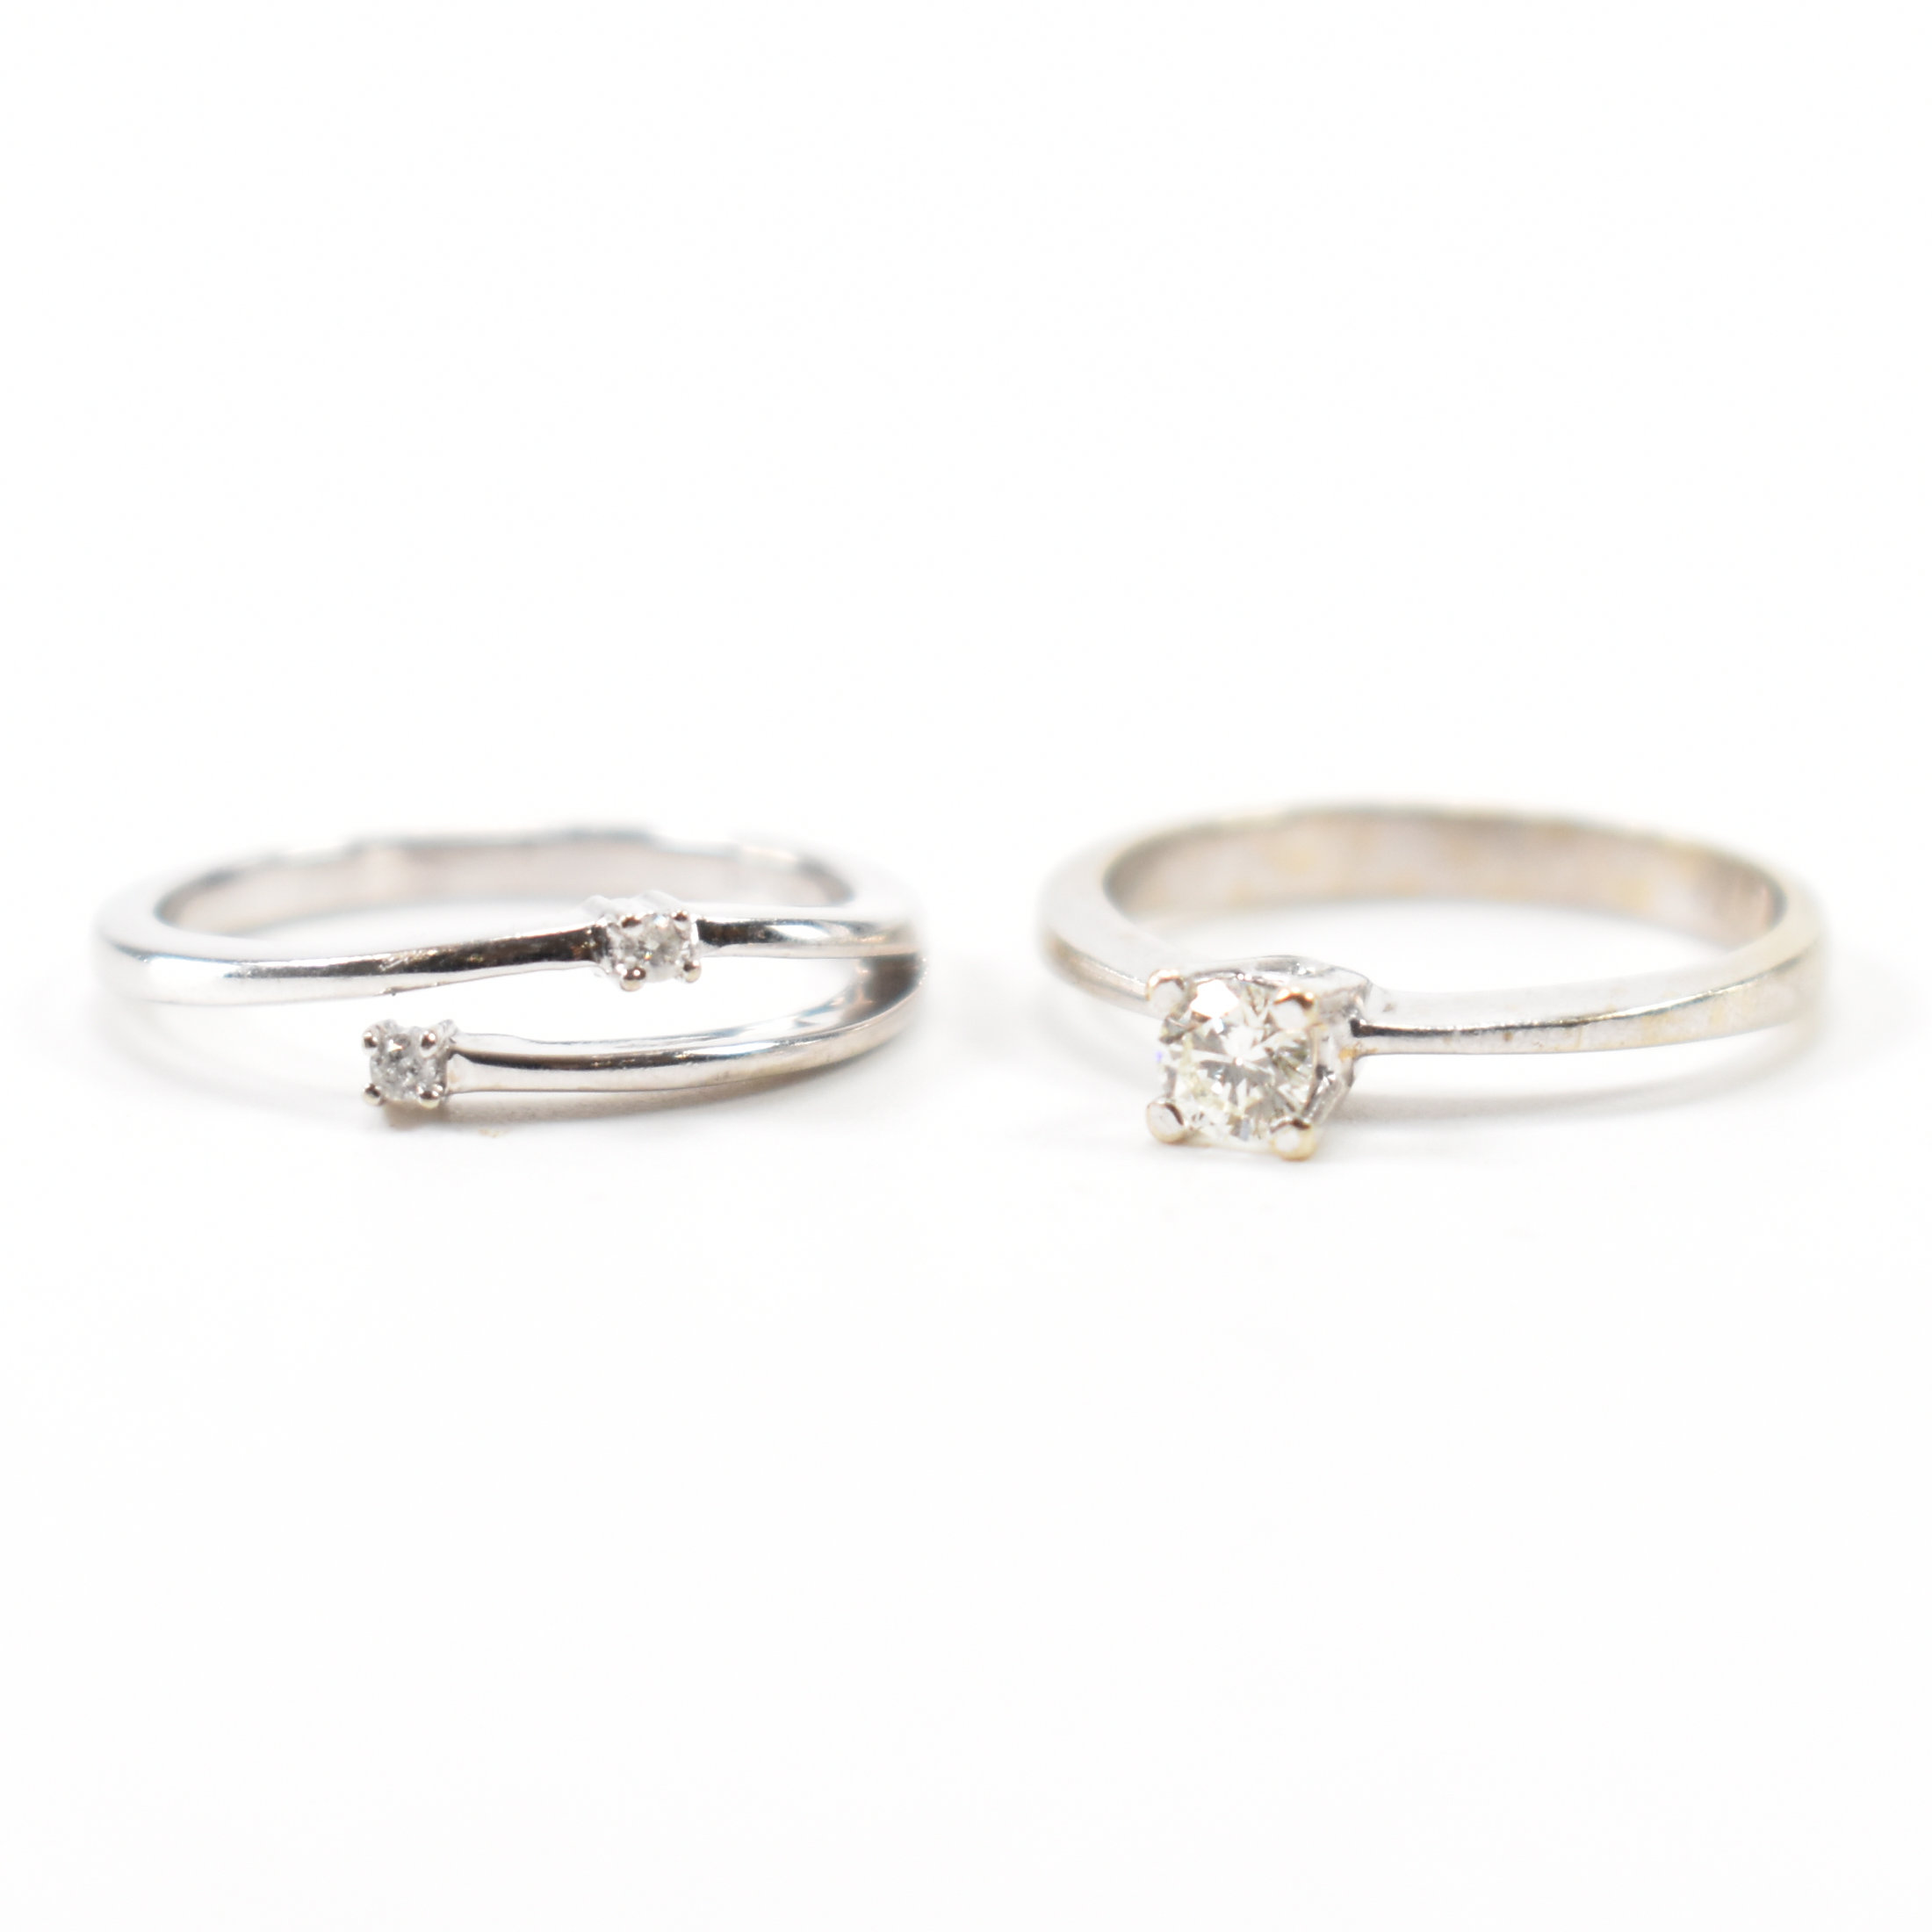 TWO 9CT GOLD & DIAMOND RINGS